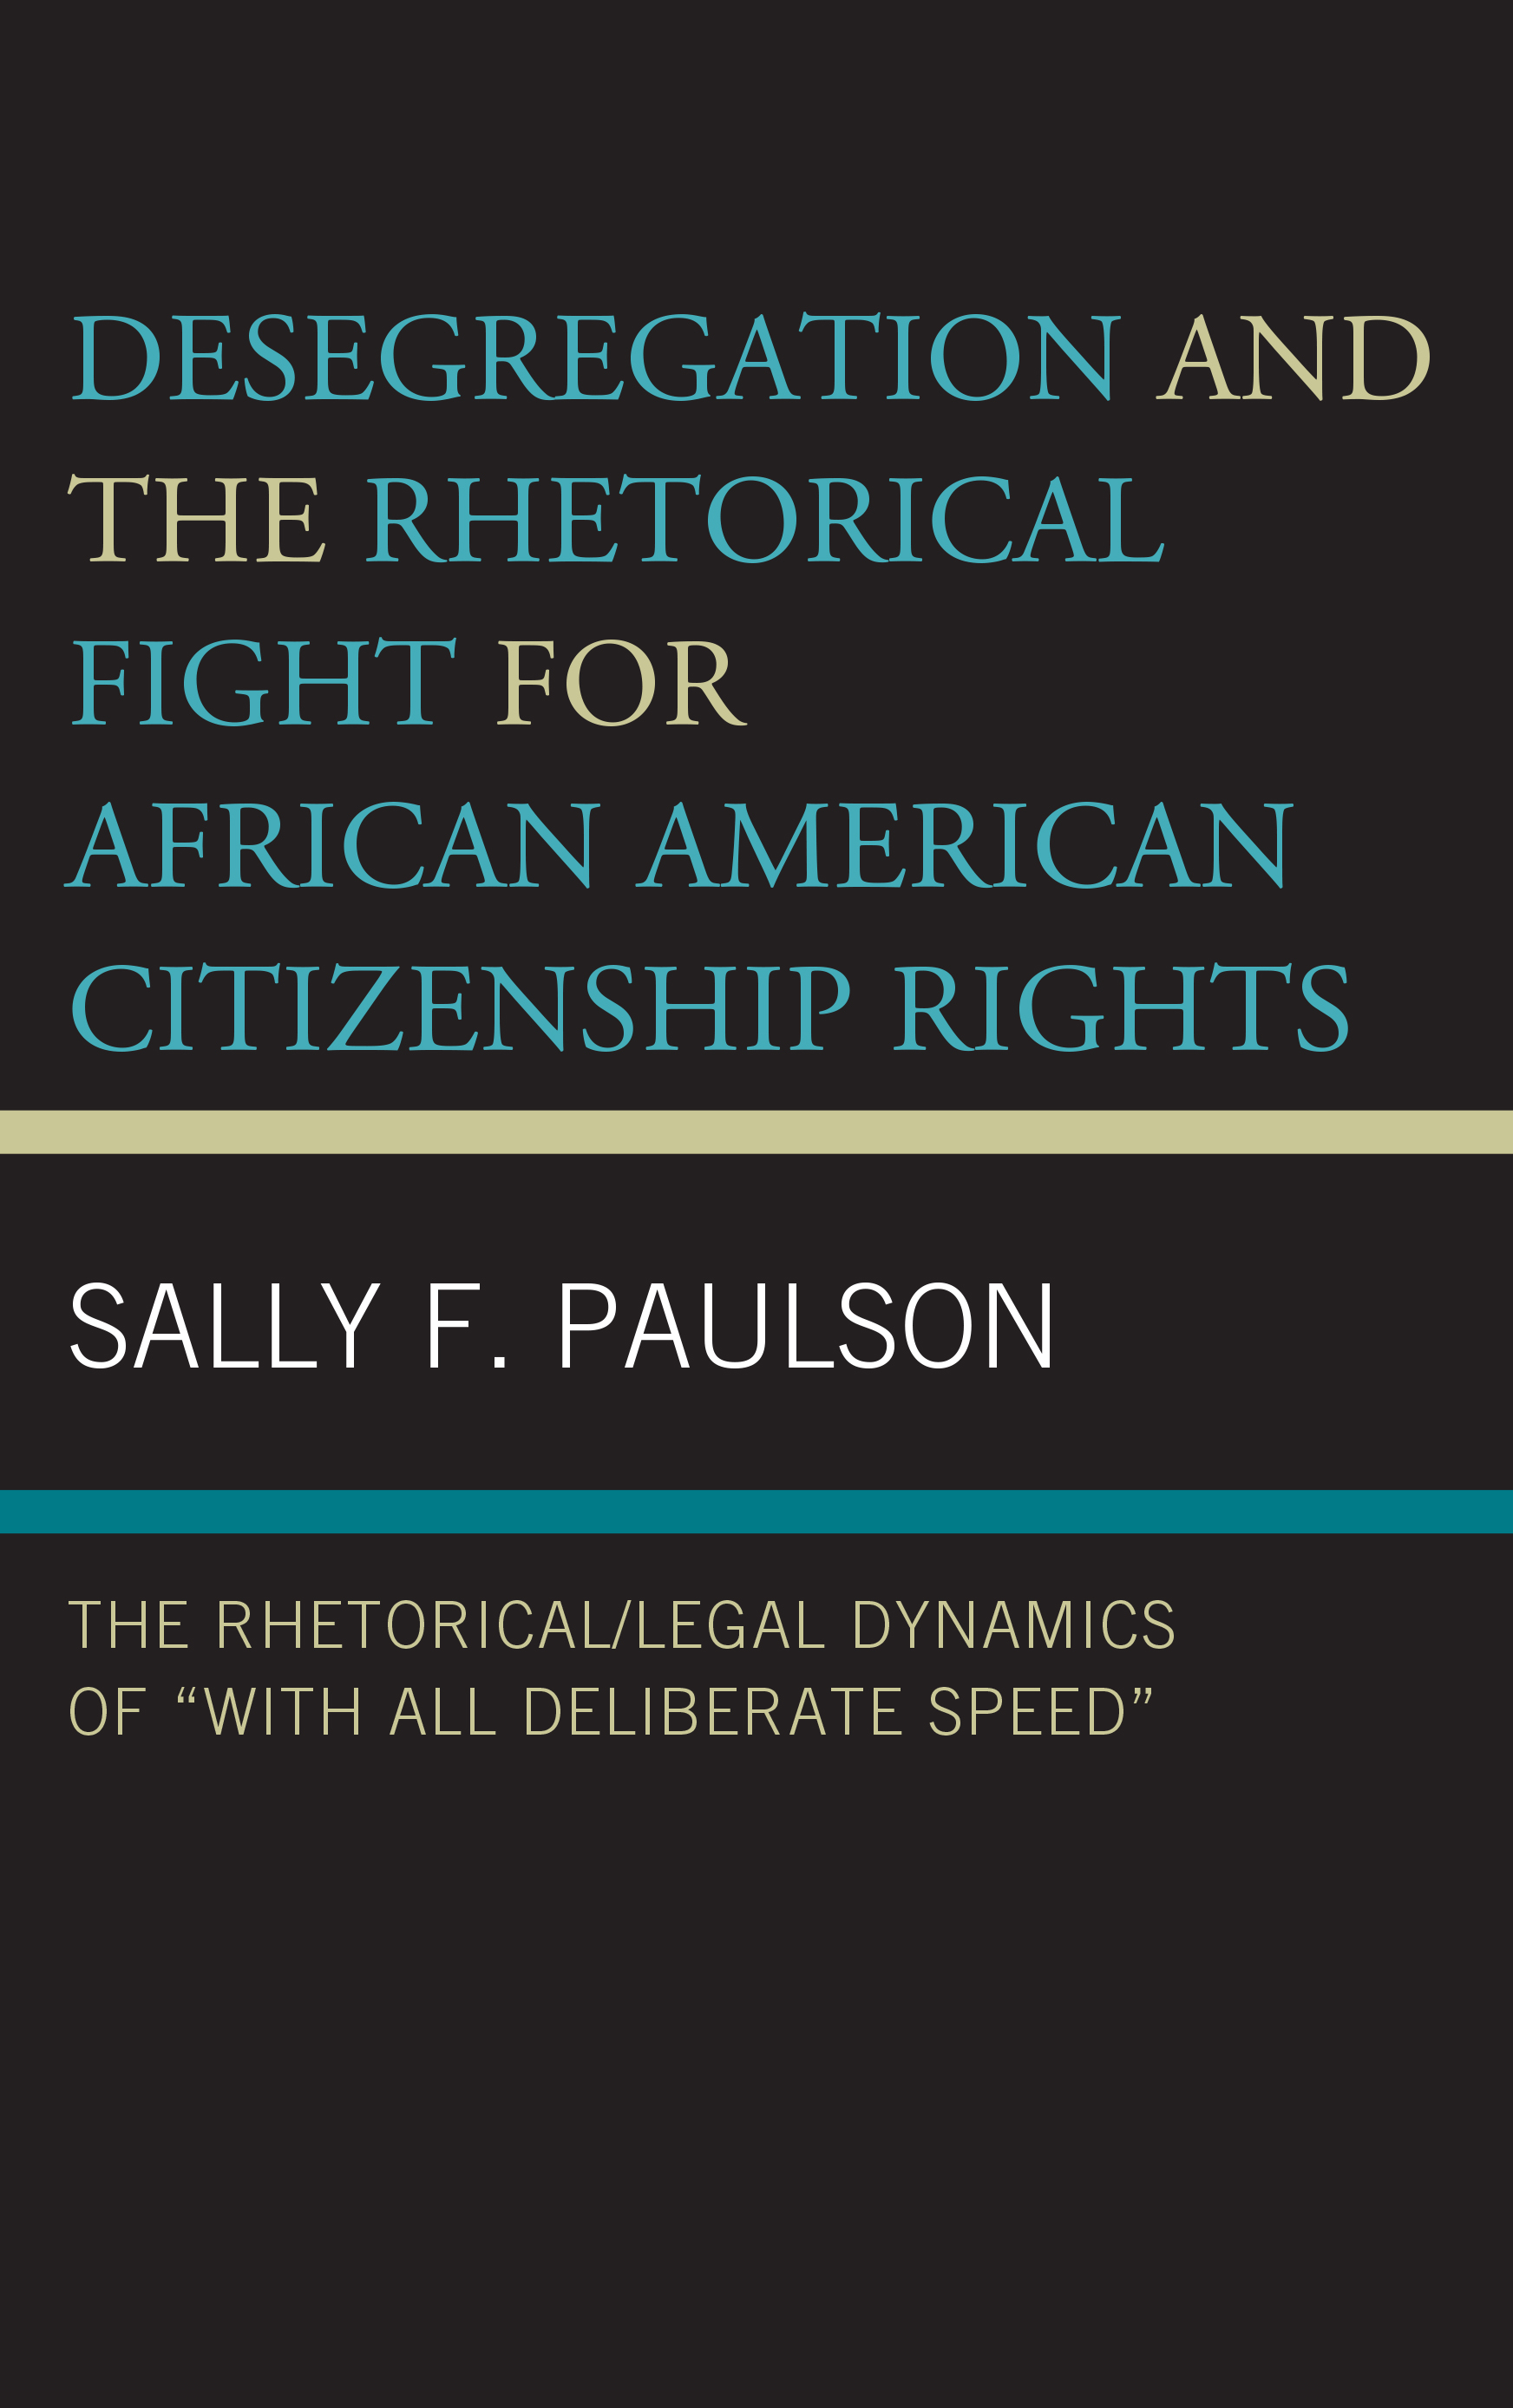 Desegregation and the Rhetorical Fight for African American Citizenship Rights: The Rhetorical/Legal Dynamics of “With All Deliberate Speed”